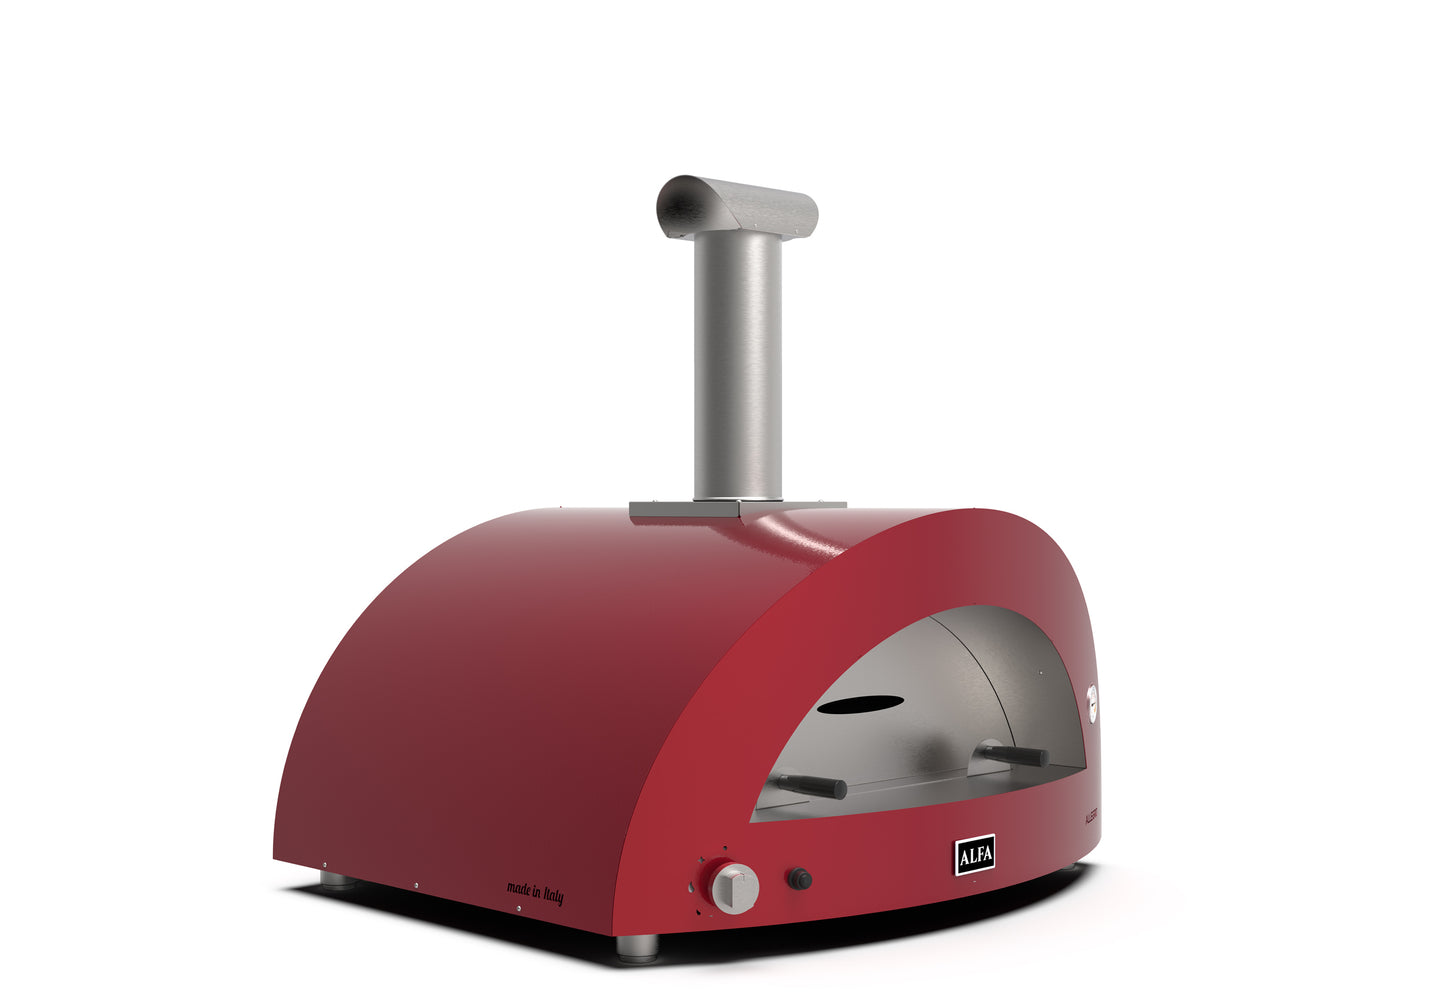 Alfa Moderno '5 Pizze' Gas or Wood Pizza Oven - Antique Red